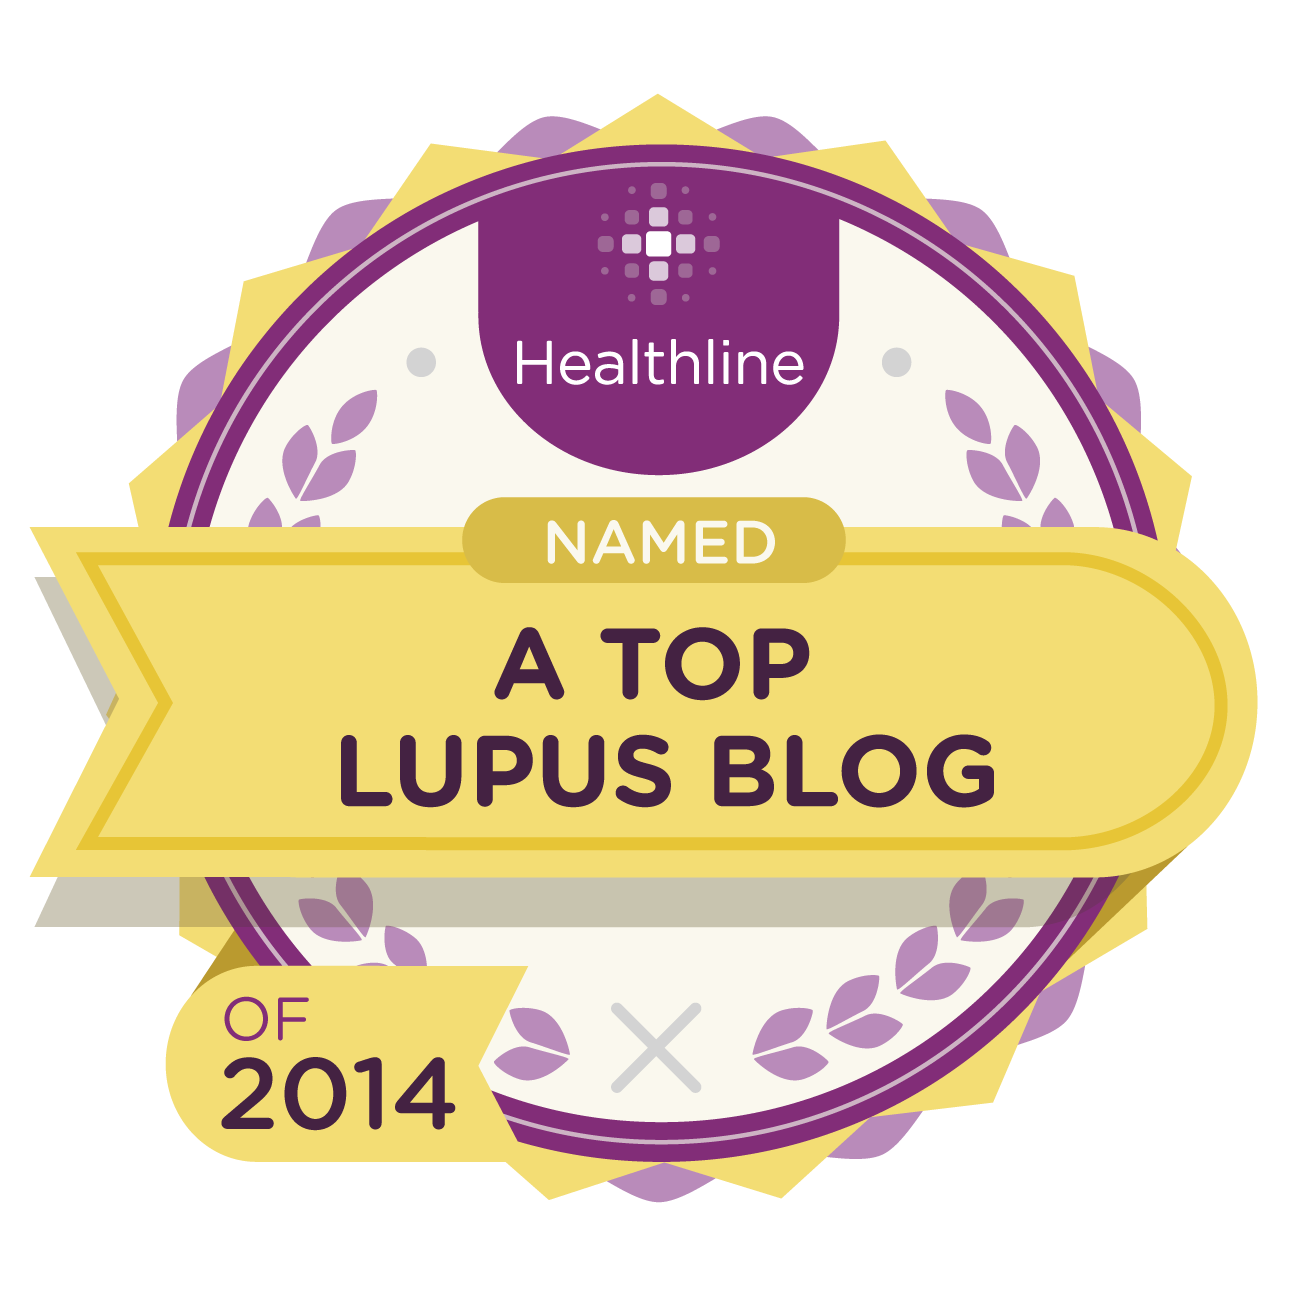 The 12 Best Lupus Blogs of 2014